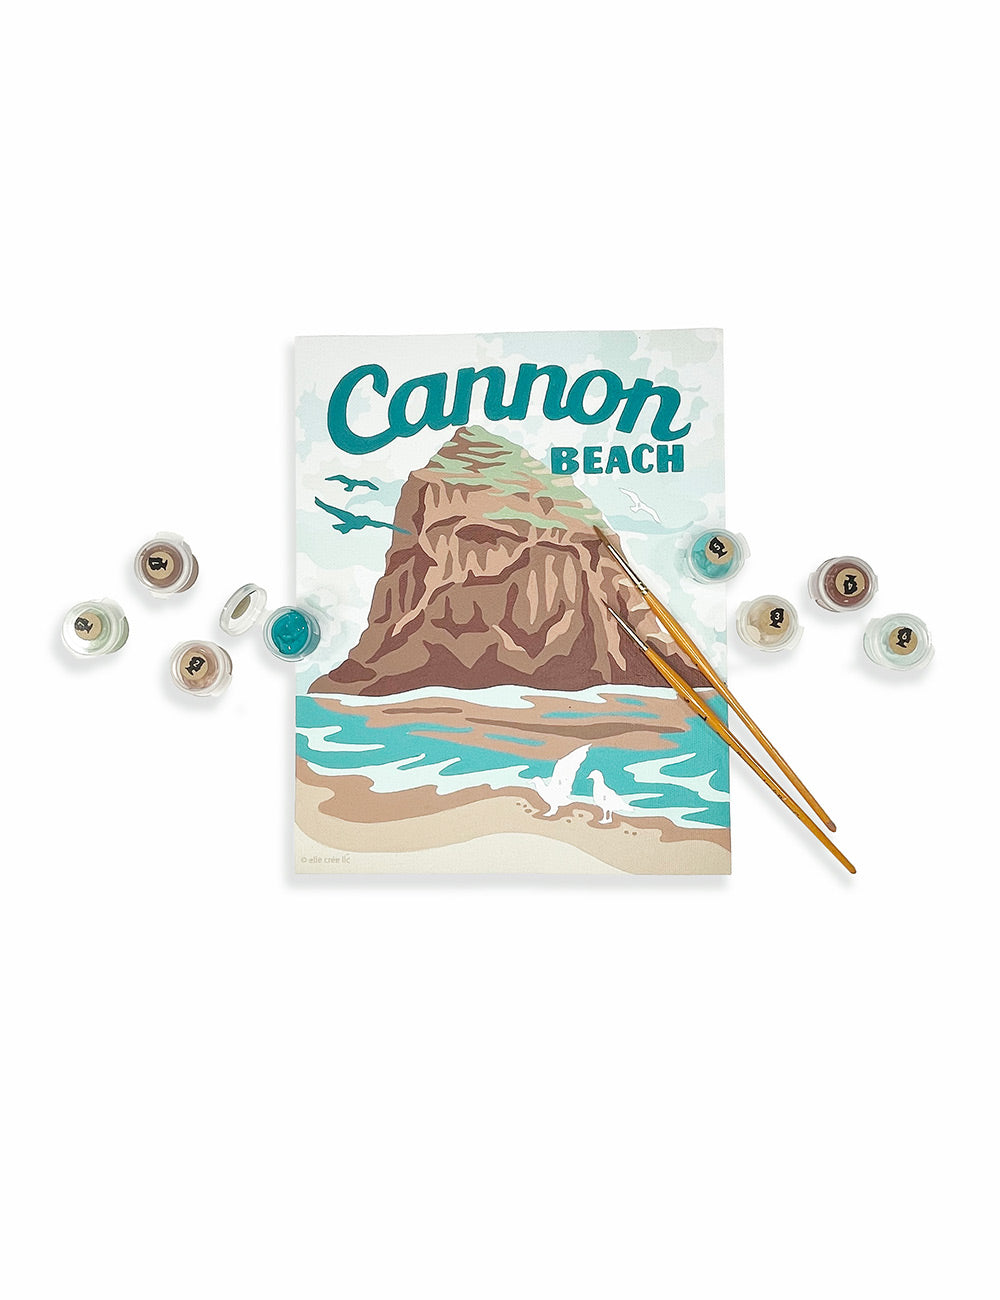 Haystack Rock at Cannon Beach | 8x10 paint-by-number kit - Elle Crée